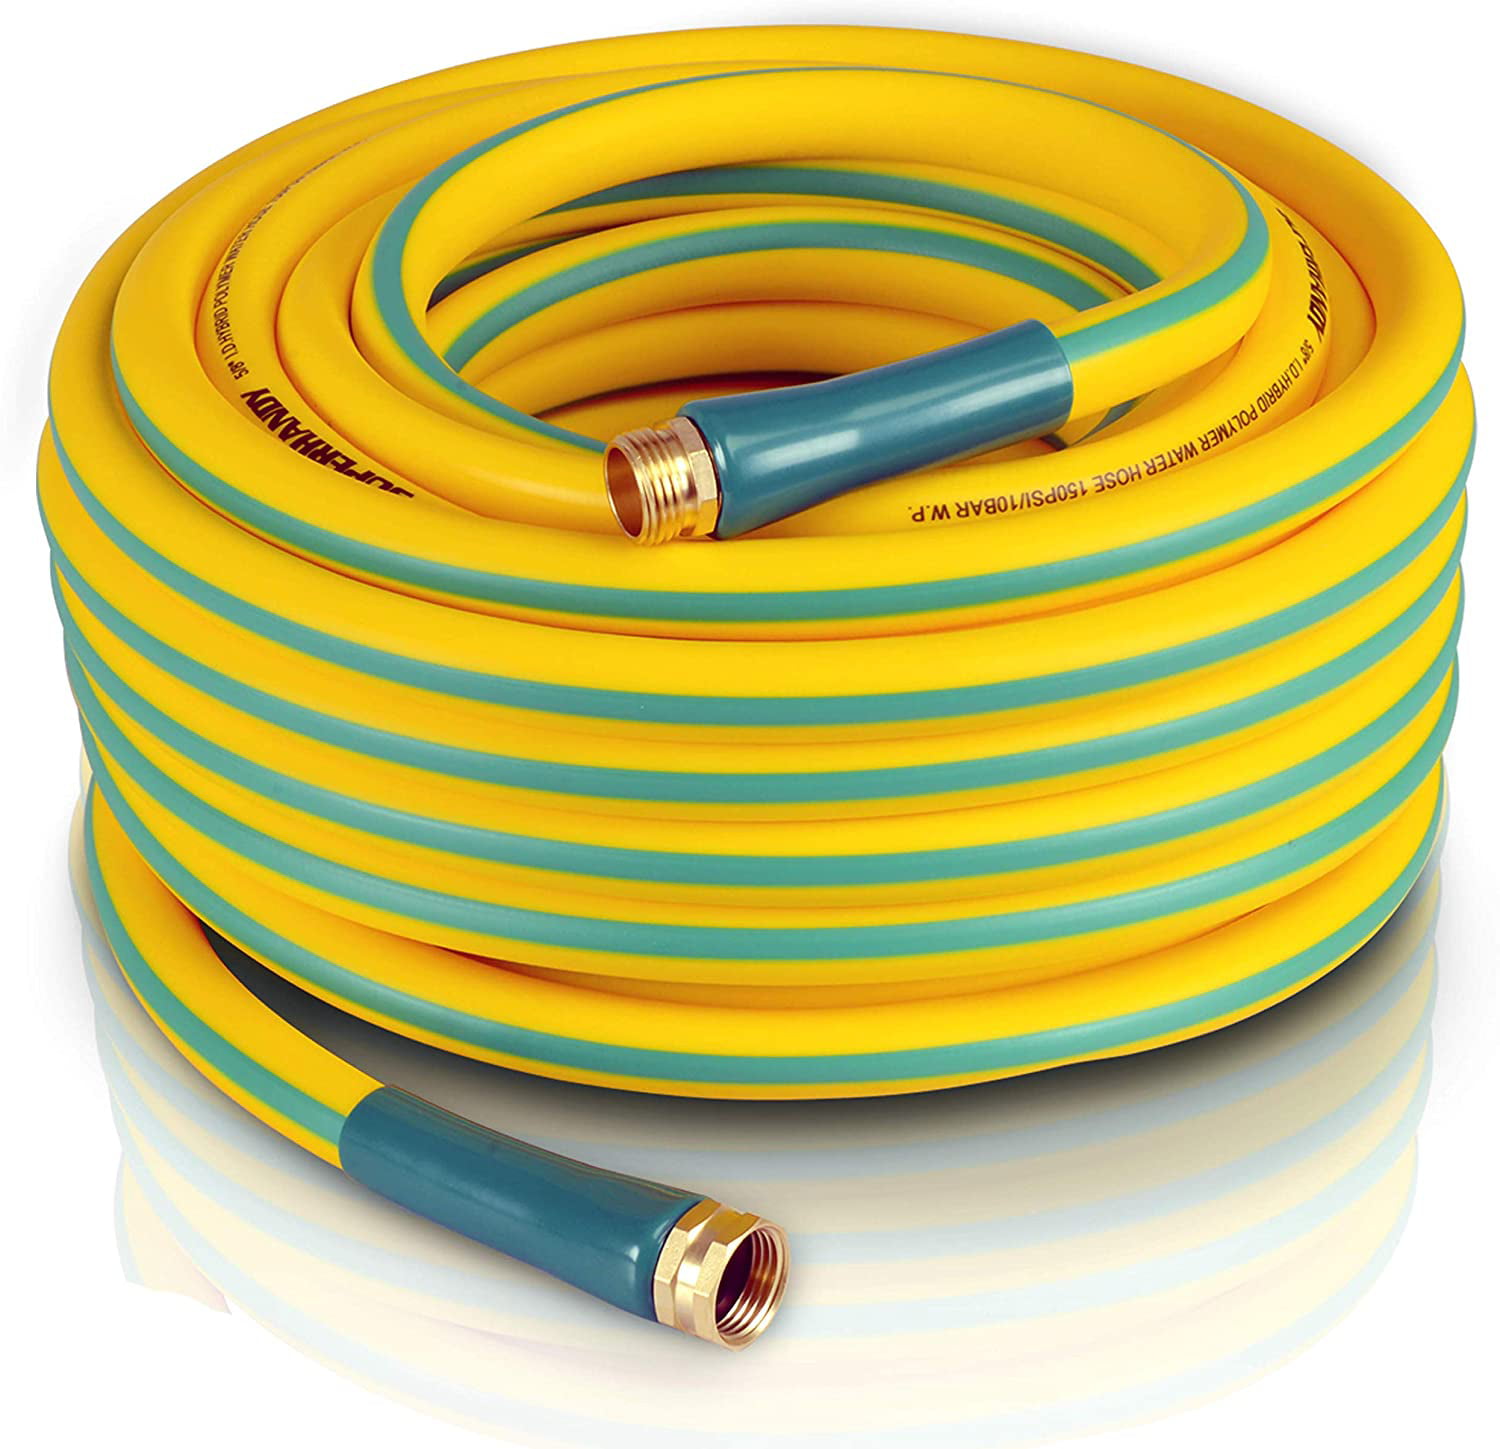 Blue YOTOO Heavy Duty Hybrid Garden Water Hose 5/8-Inch by 25-Feet 150 PSI Kink Resistant Flexible with Swivel Grip Handle and 3/4 GHT Solid Brass Fittings